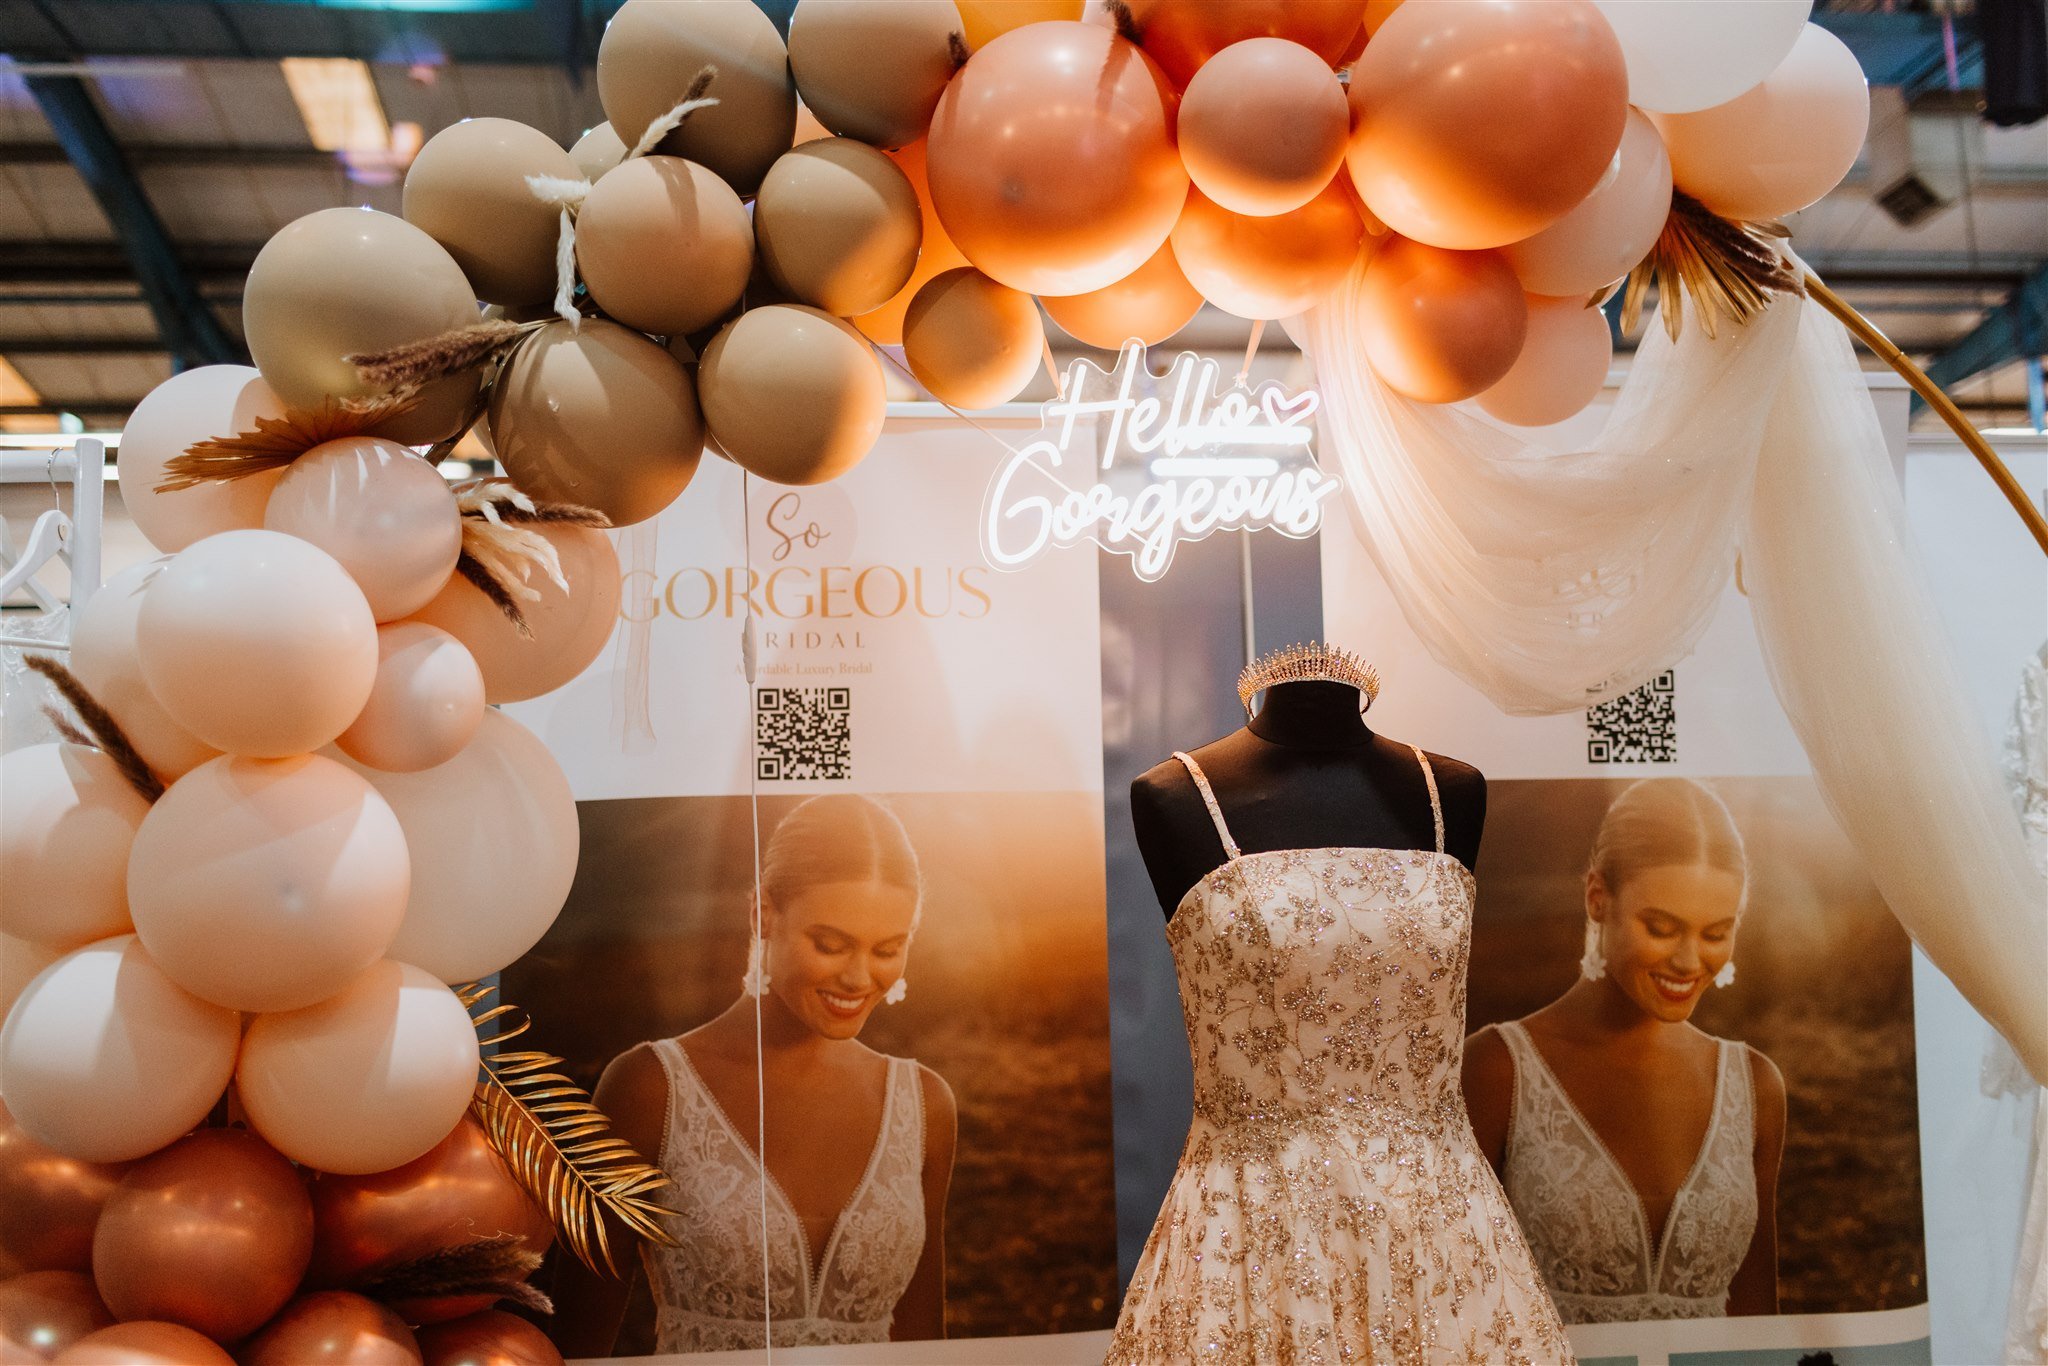 So Gorgeous Bridal Boutique stand setup from The Big Southwest Wedding Fair